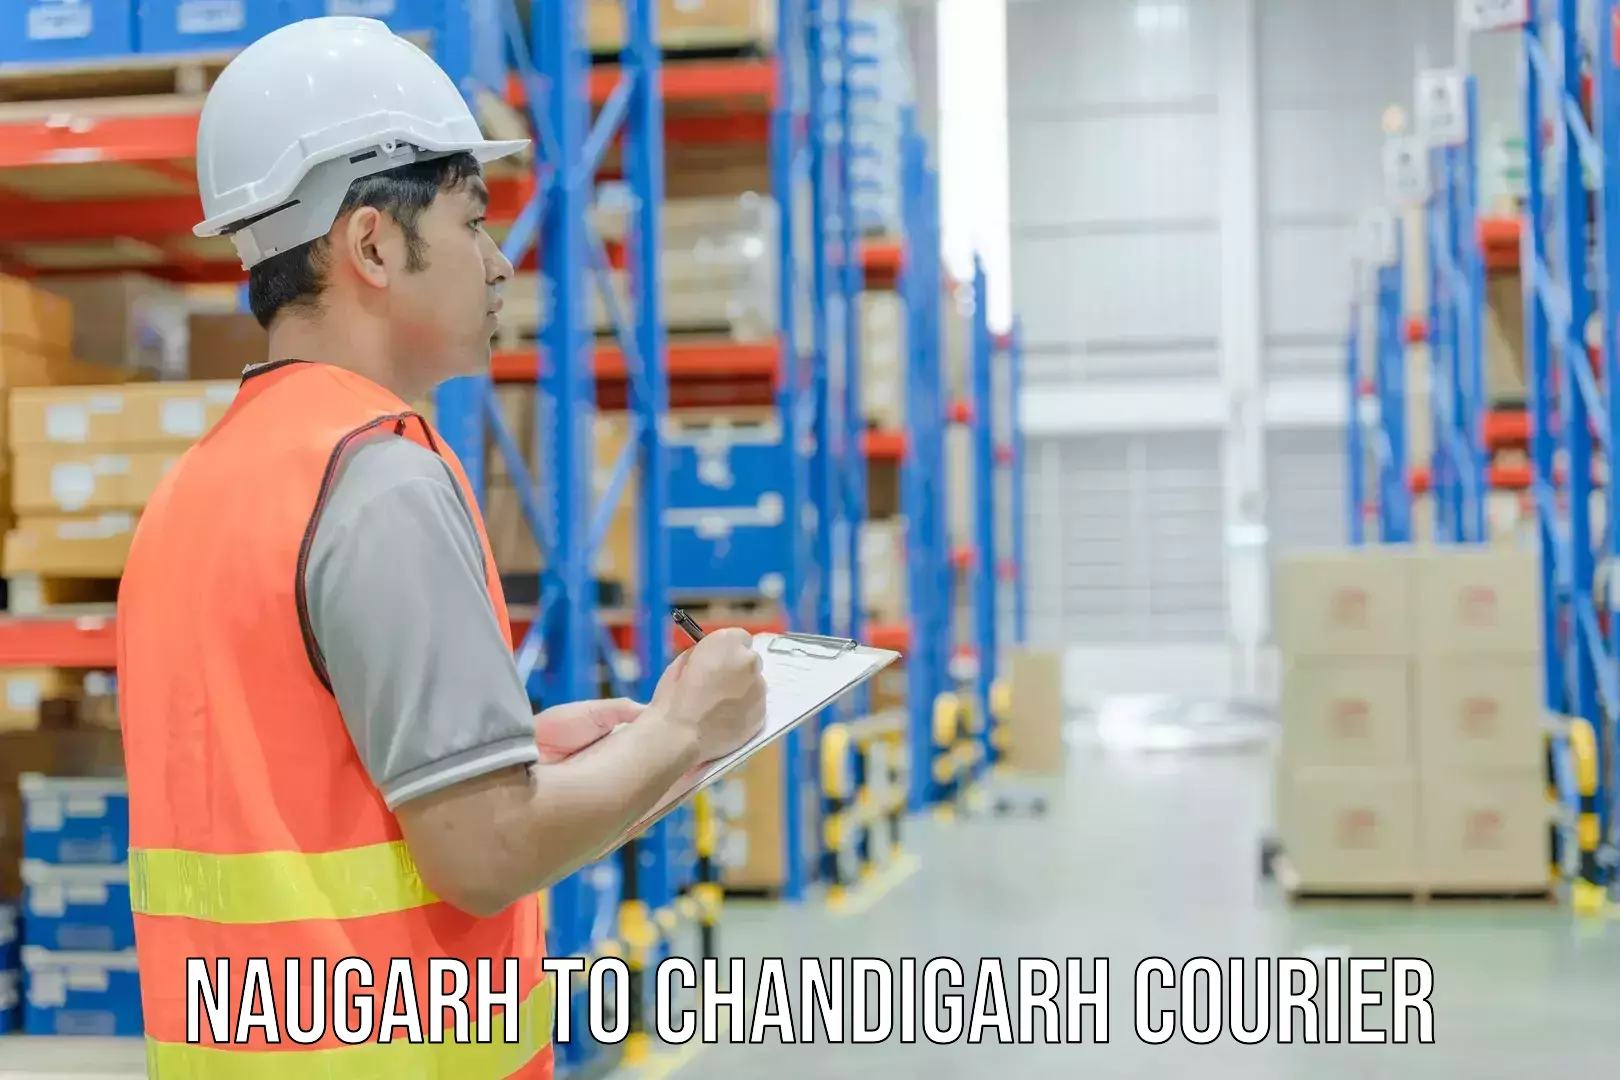 Courier service efficiency in Naugarh to Chandigarh